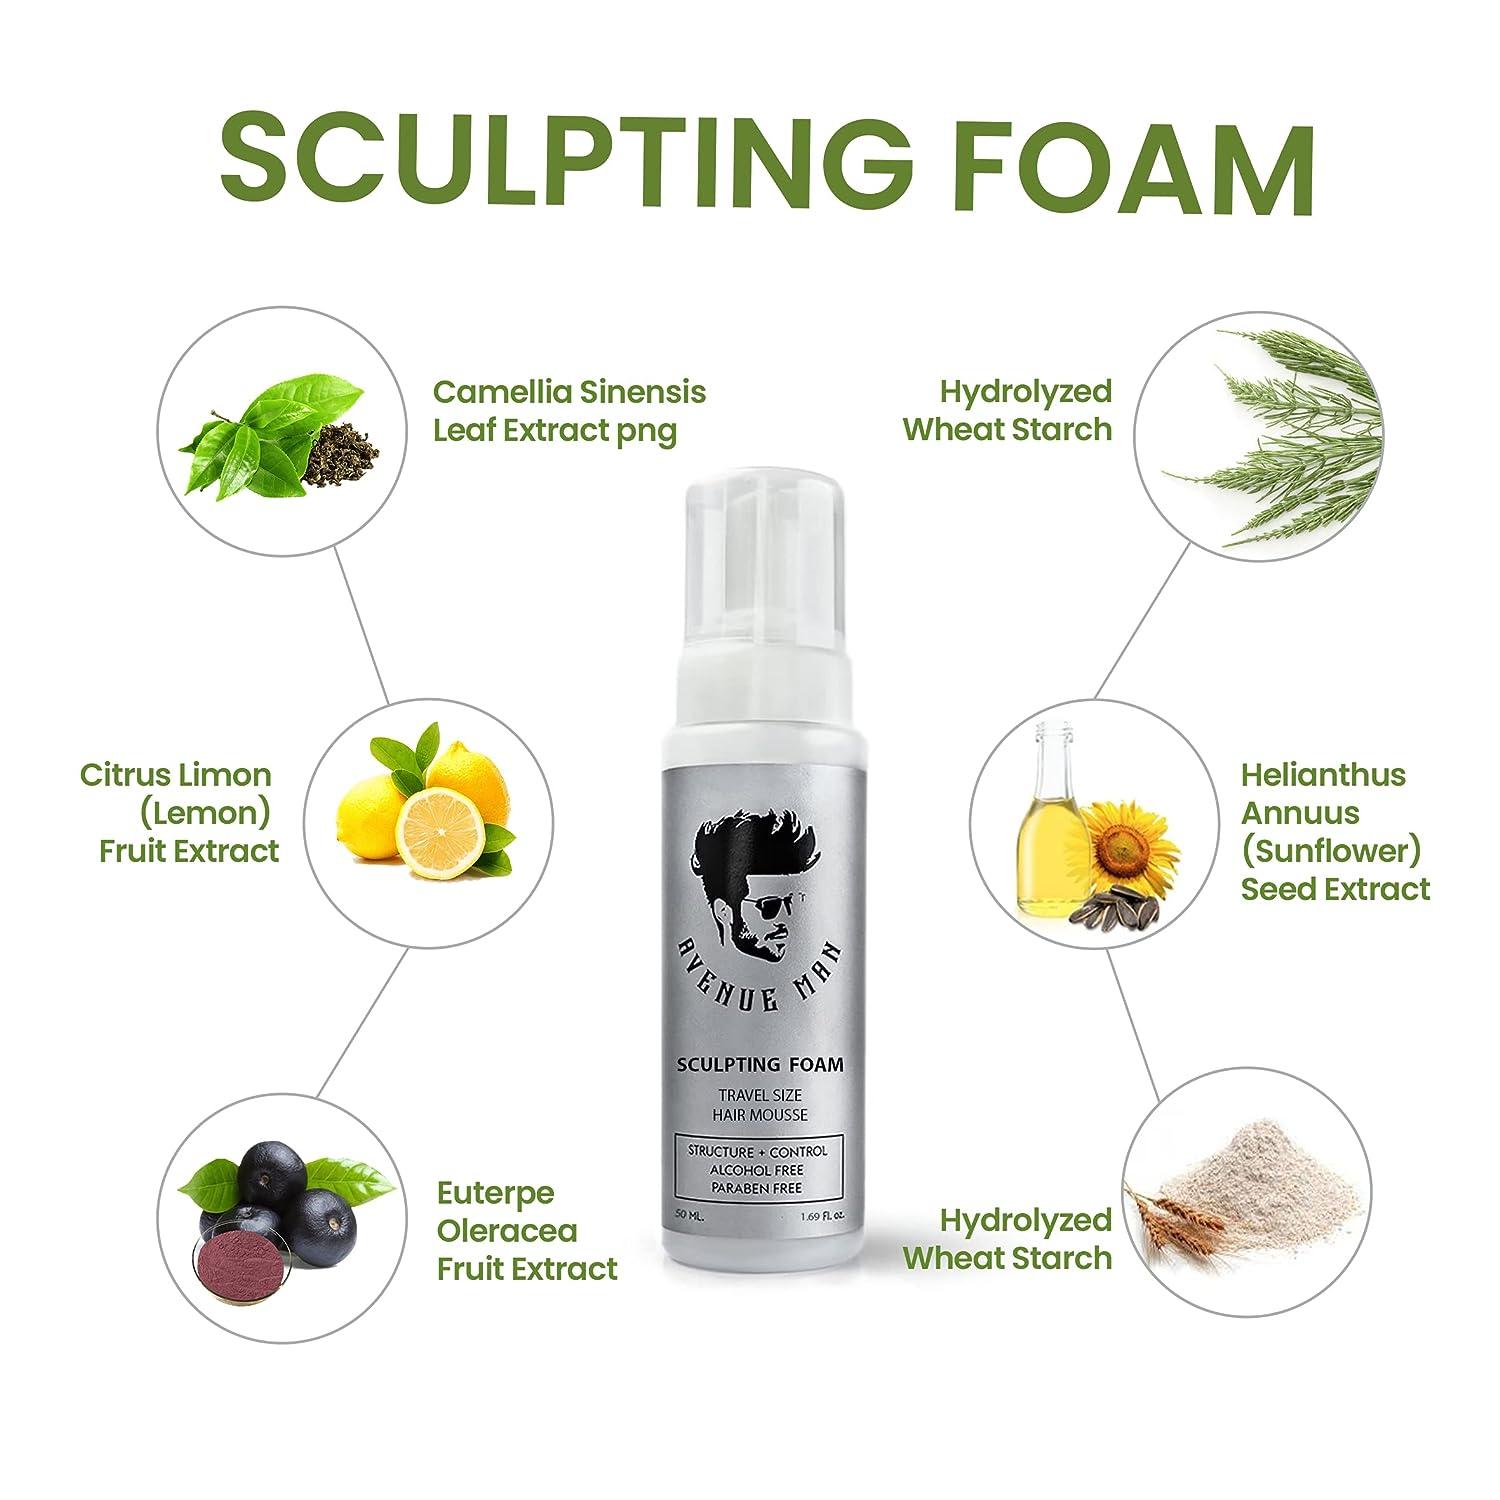 Avenue Man Sculpting Foam for Men - Travel Size (1.69 oz) - Firm Hold  Volumizing Hair Mousse with Herbal Extracts Styling Products - Alcohol and  Paraben-Free Volumizer - Made in the USA